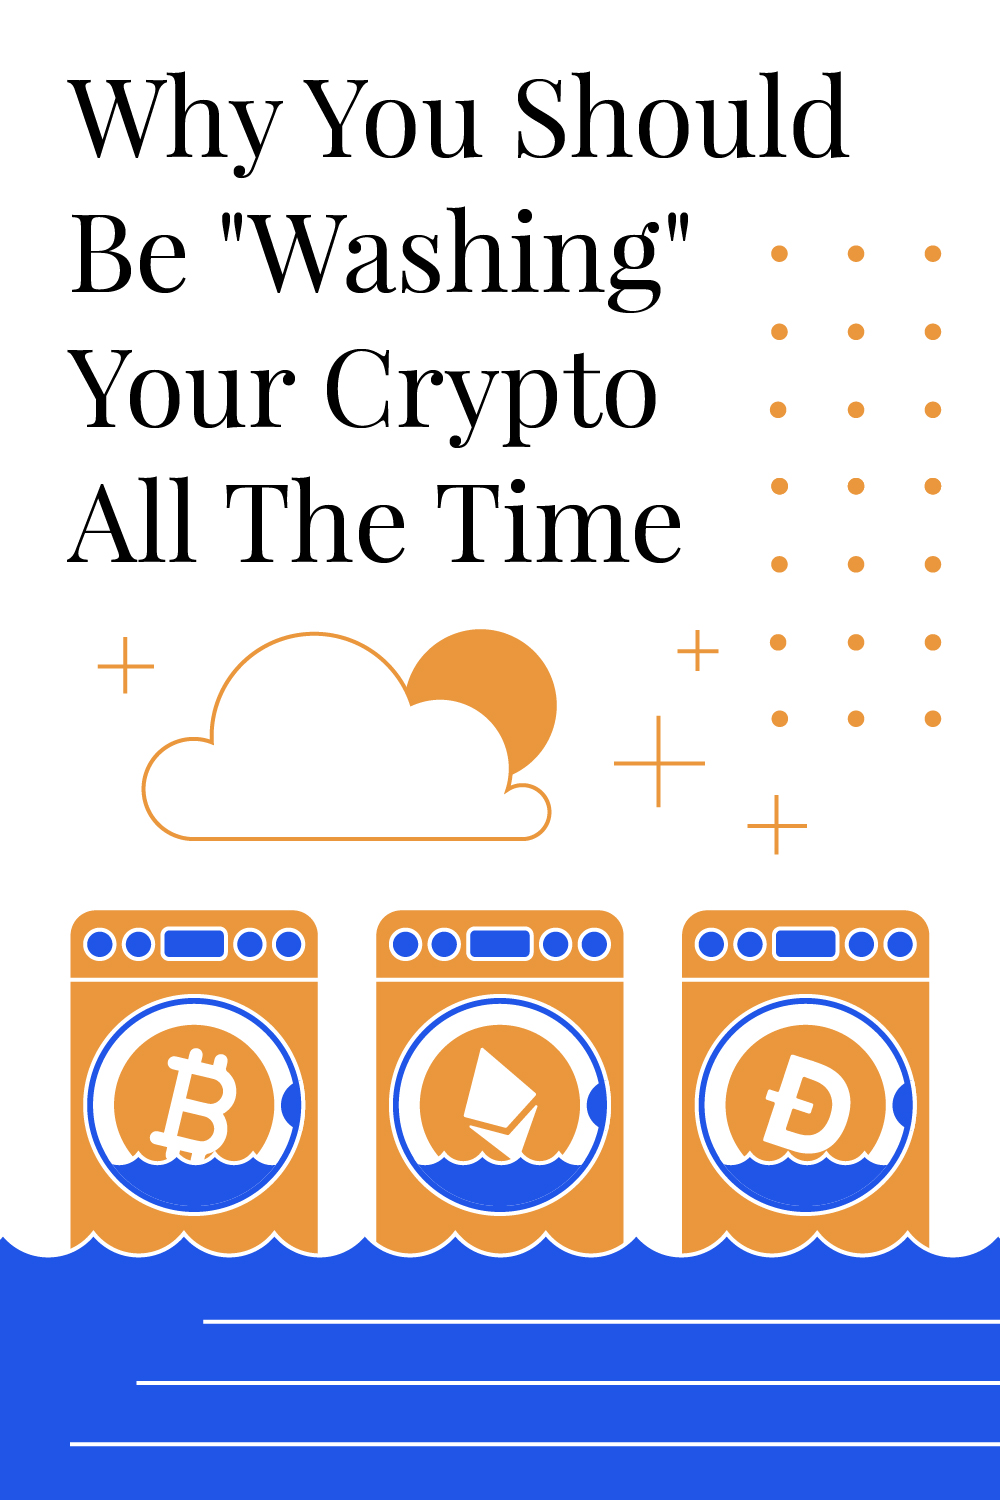 Why You Should Be “Washing” Your Crypto All The Time